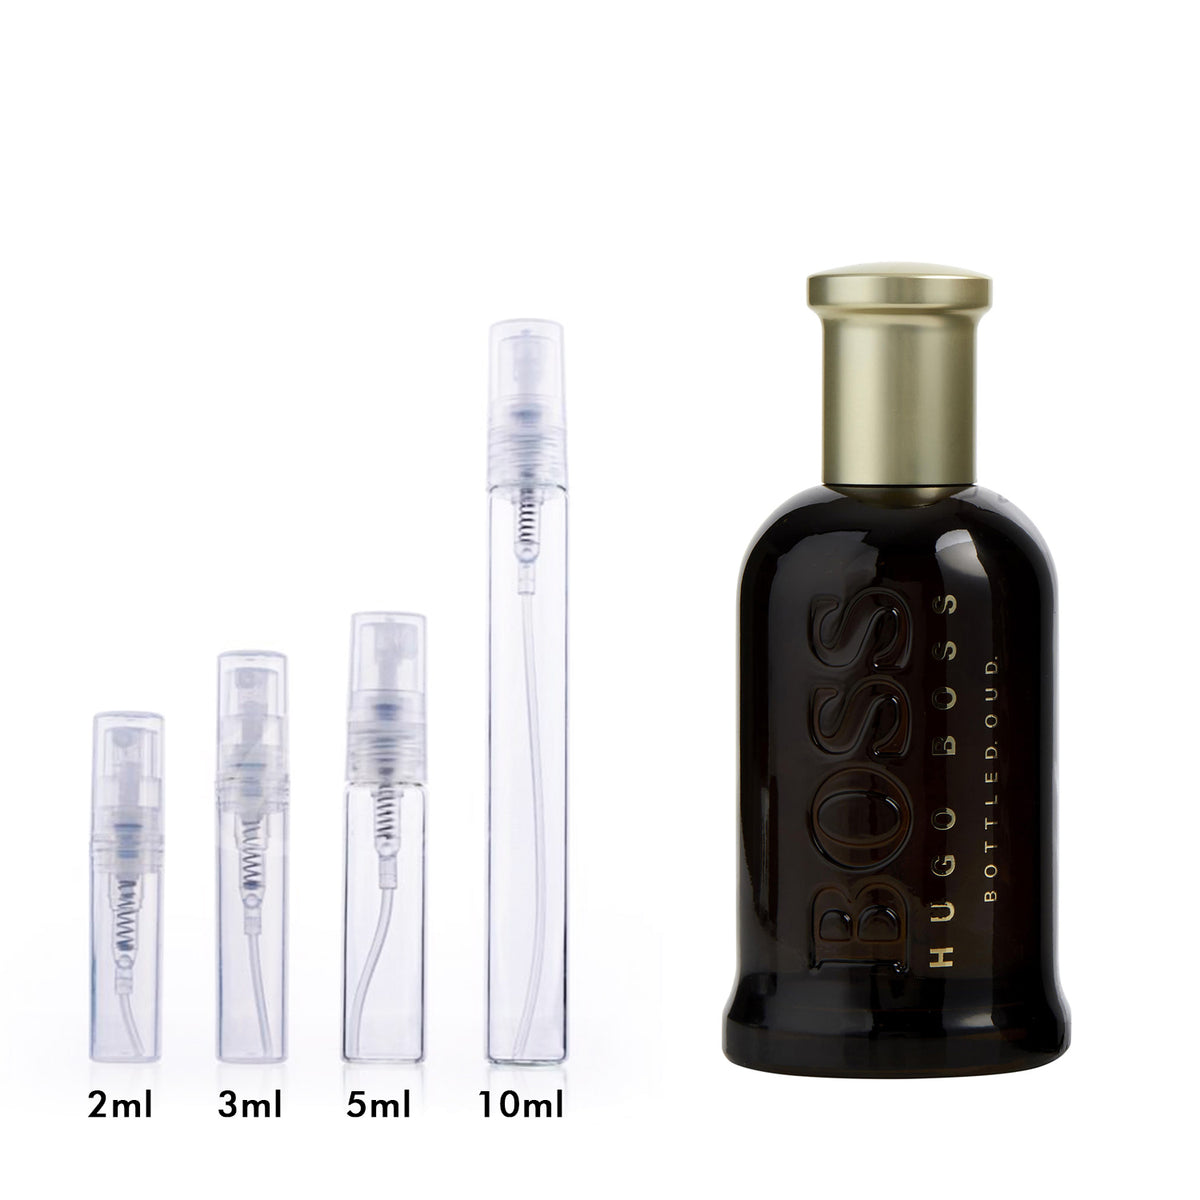 rytme Colonial performer Bottled Oud by HUGO BOSS Fragrance Samples | DecantX | Eau de Parfum Scent  Sampler and Travel Size Perfume Atomizer